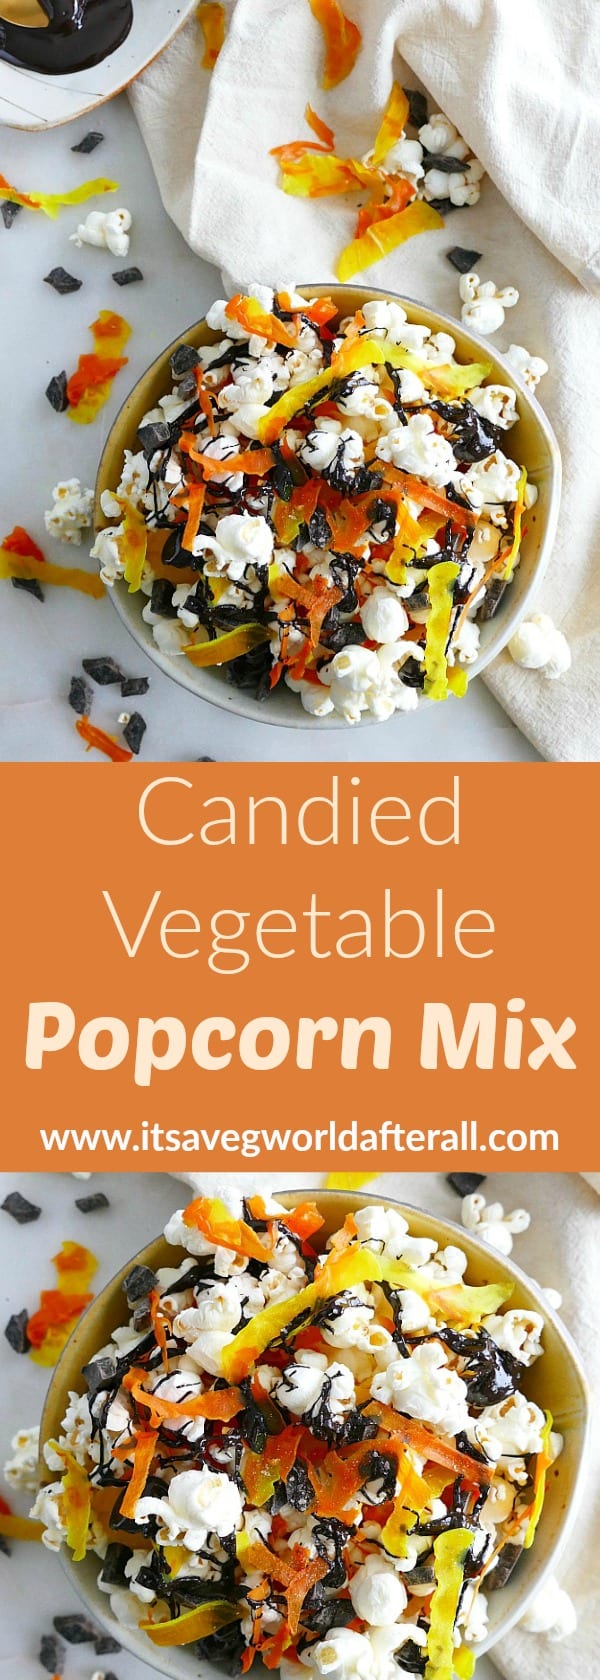 Candied Vegetable Popcorn Mix - It's a Veg World After All®